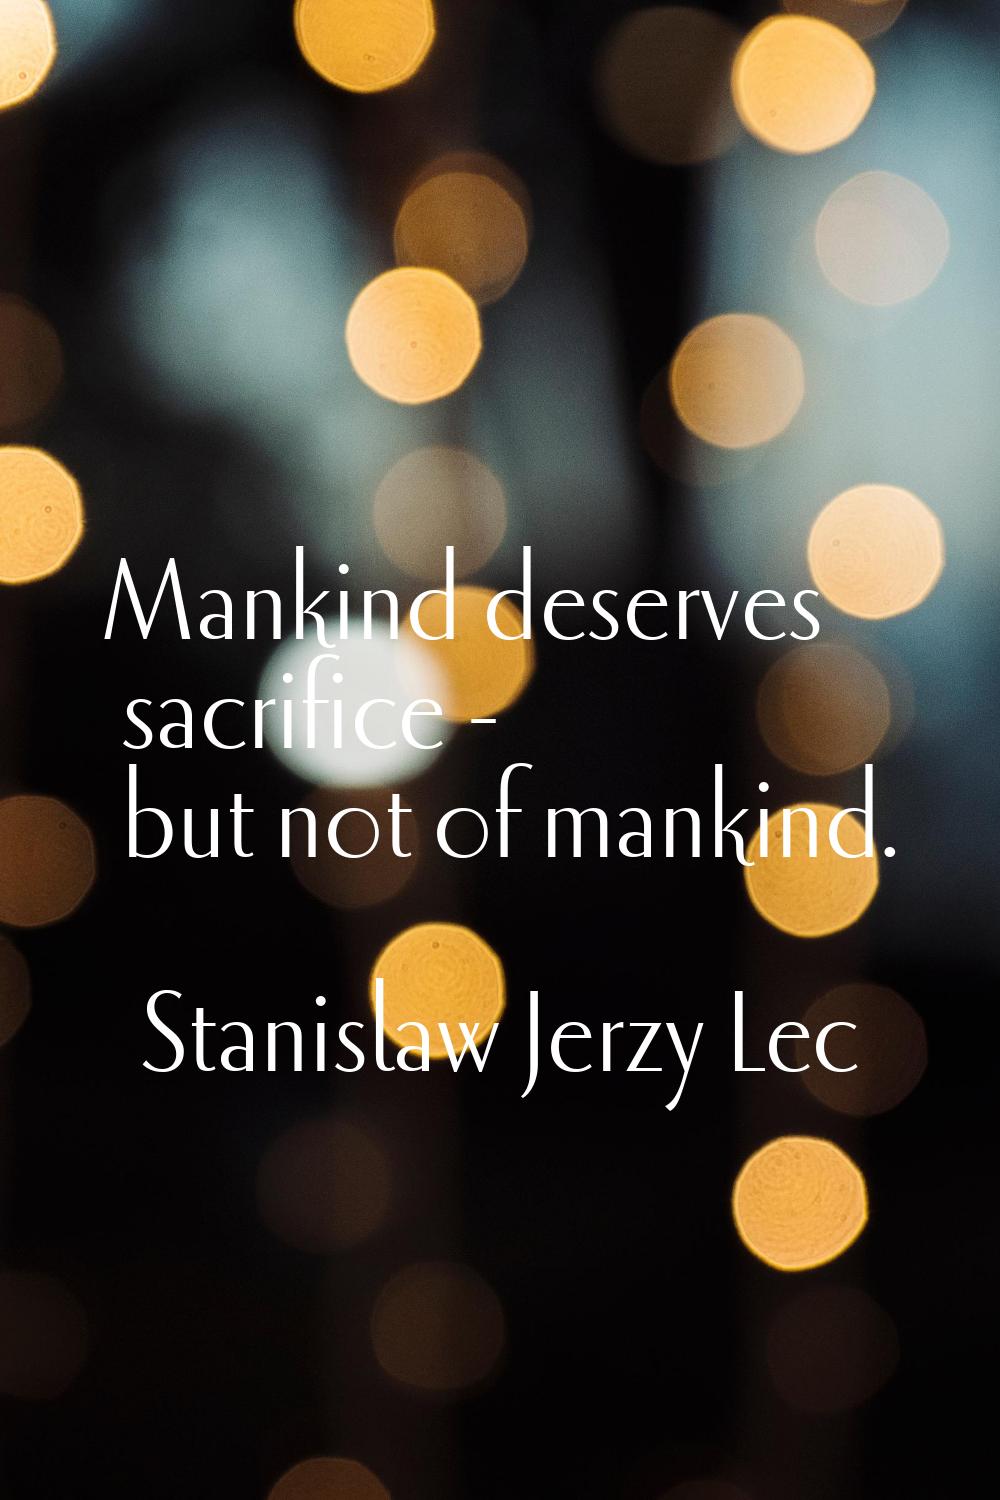 Mankind deserves sacrifice - but not of mankind.